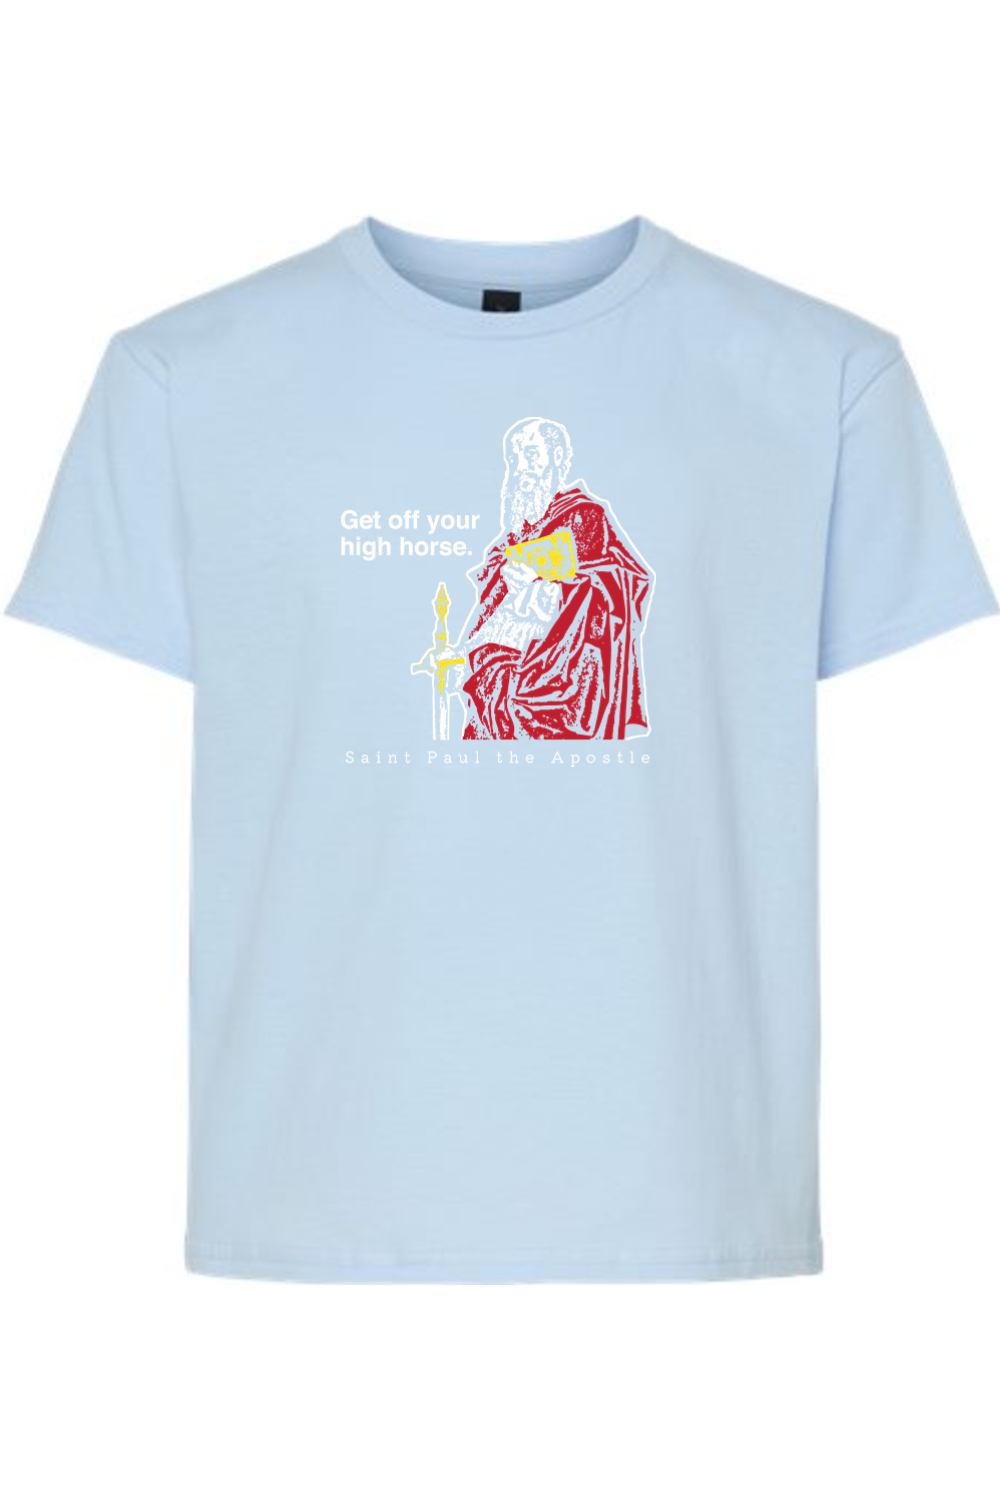 Get Off Your High Horse - St. Paul the Apostle Youth T-Shirt